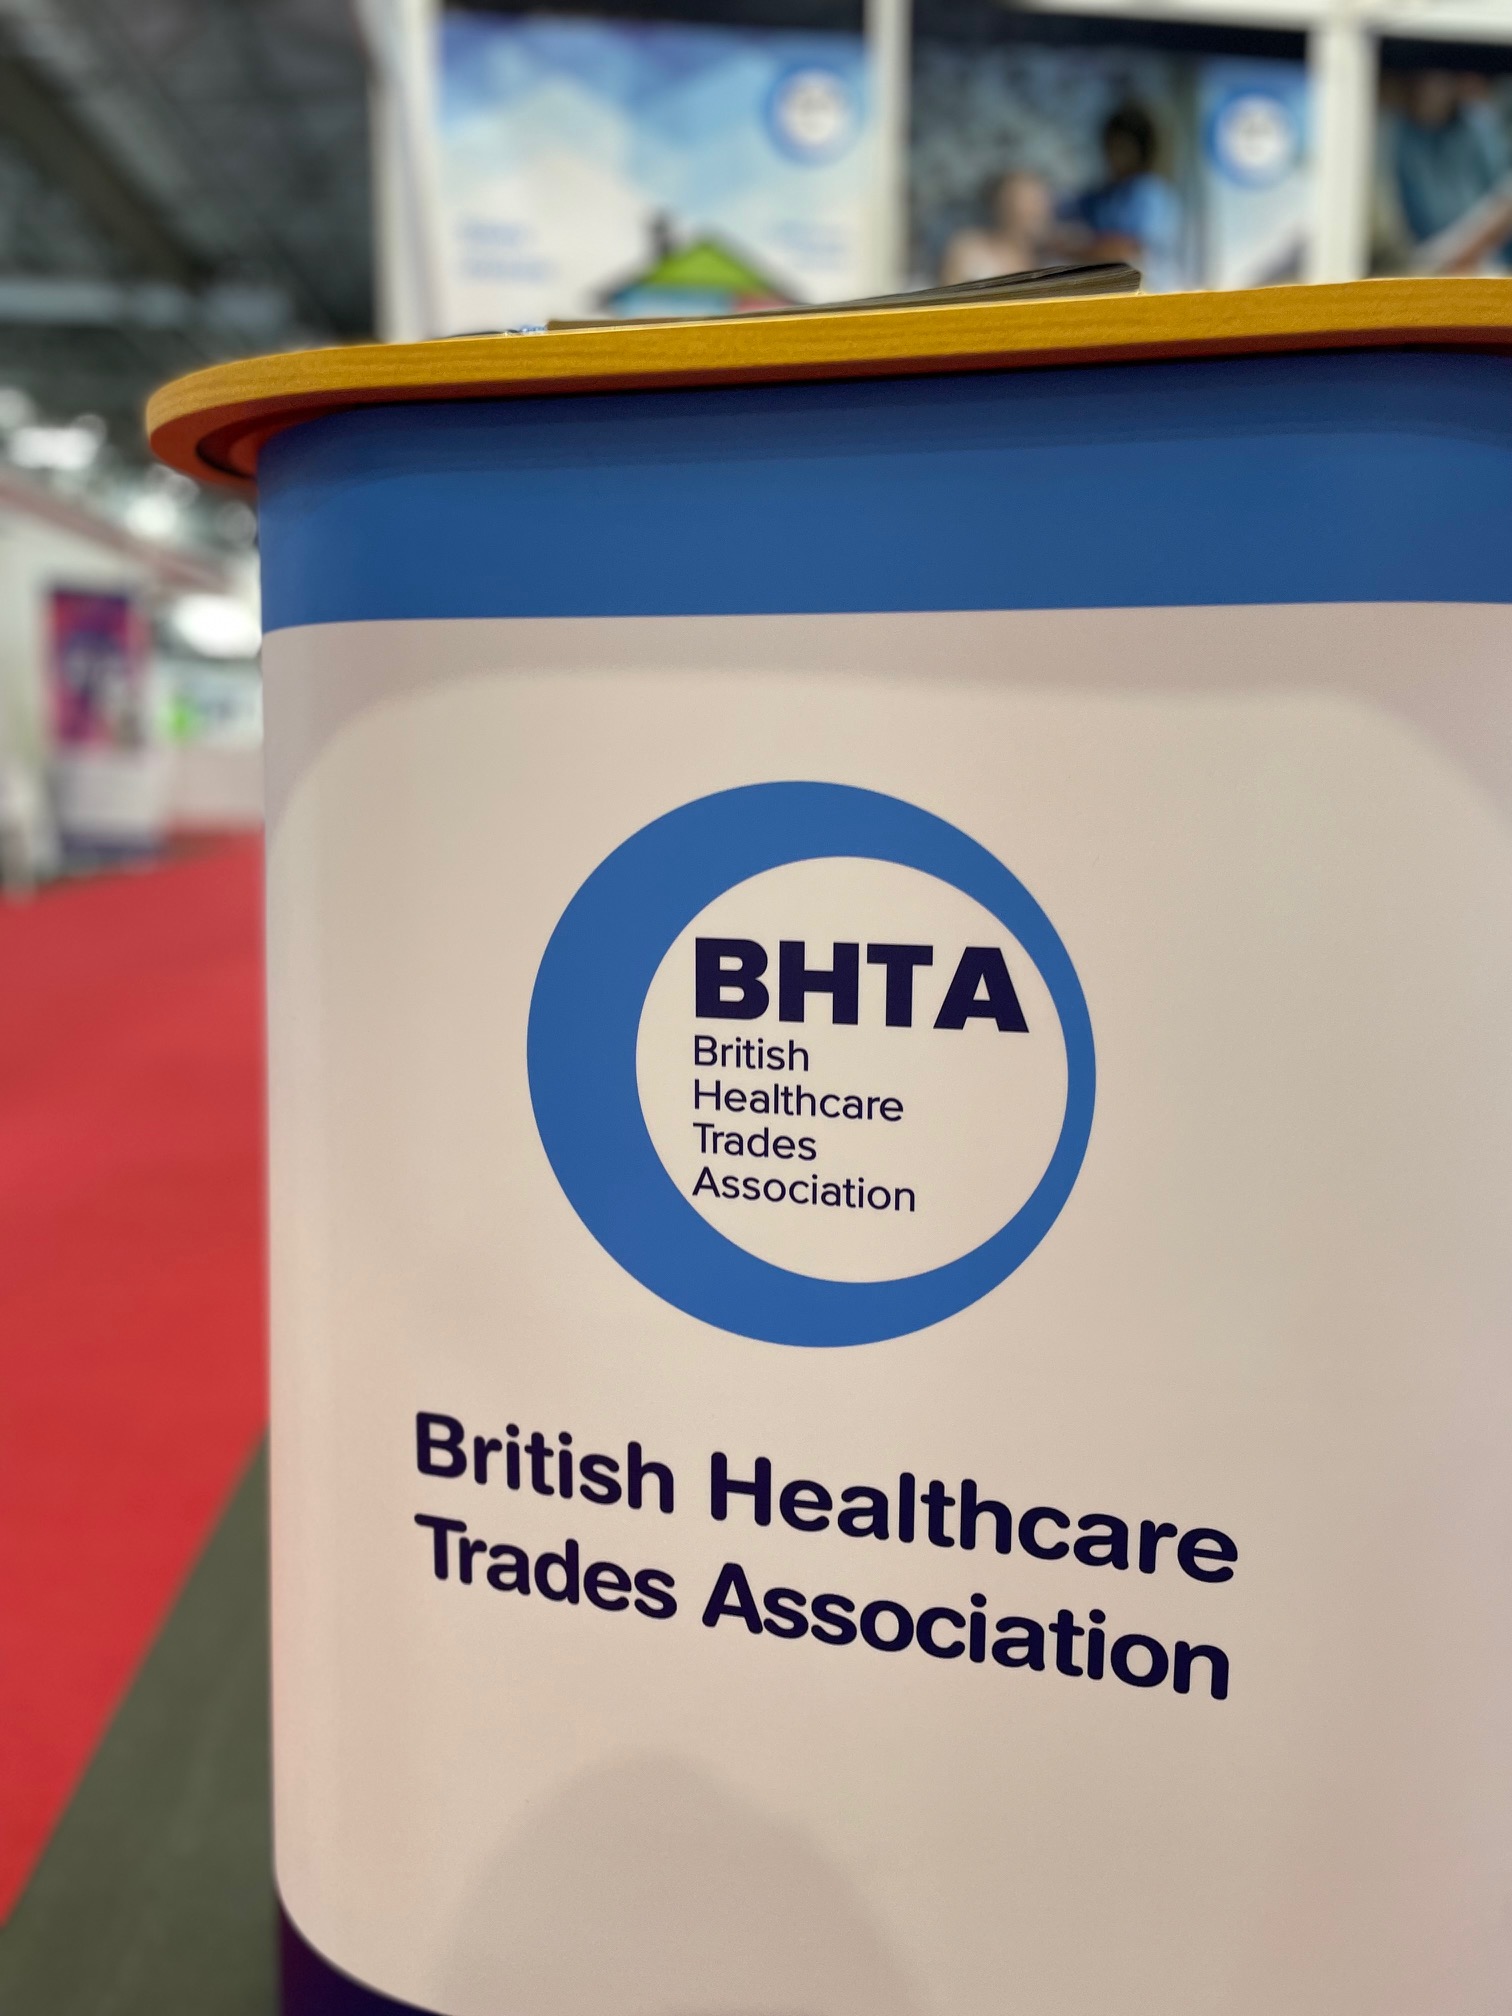 this is an image of the BHTA logo on the BHTA stand at Naidex